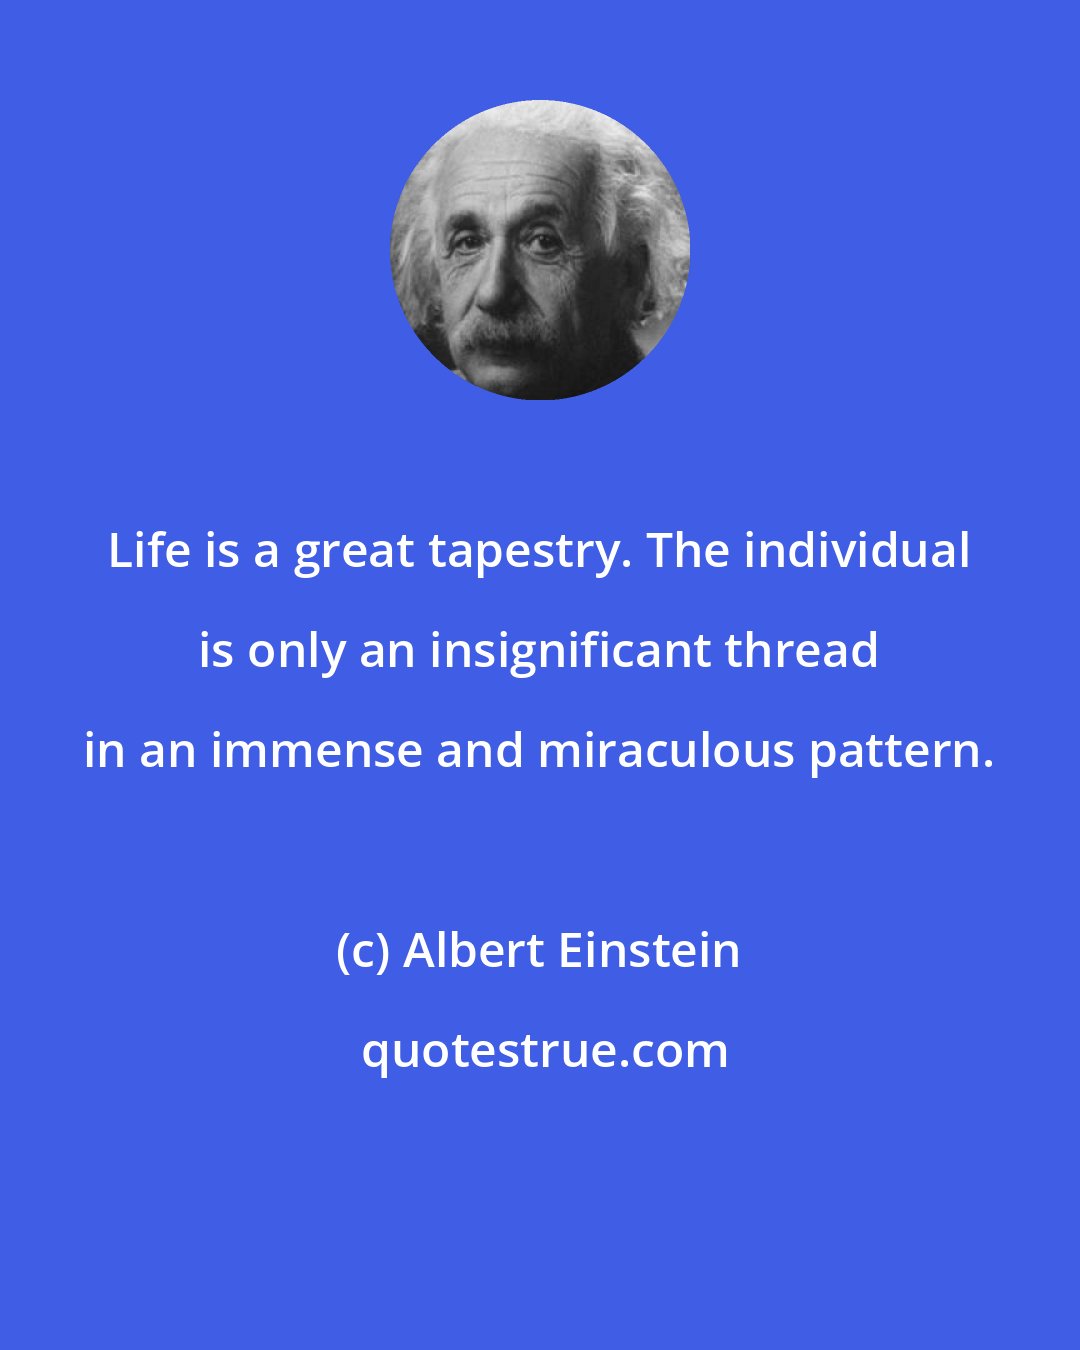 Albert Einstein: Life is a great tapestry. The individual is only an insignificant thread in an immense and miraculous pattern.